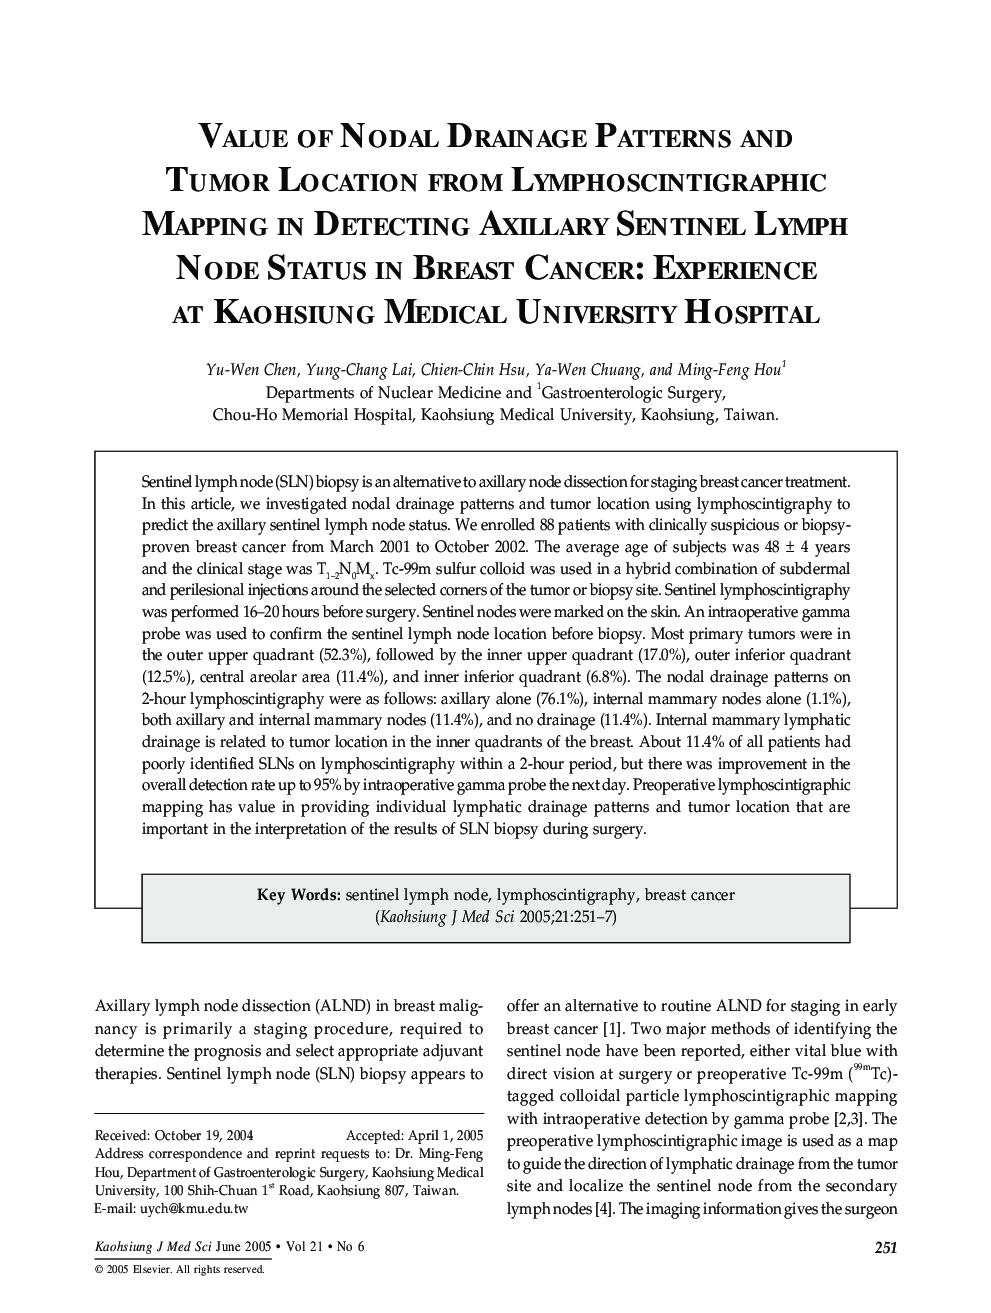 Value of Nodal Drainage Patterns and Tumor Location from Lymphoscintigraphic Mapping in Detecting Axillary Sentinel Lymph Node Status in Breast Cancer: Experience at Kaohsiung Medical University Hospital